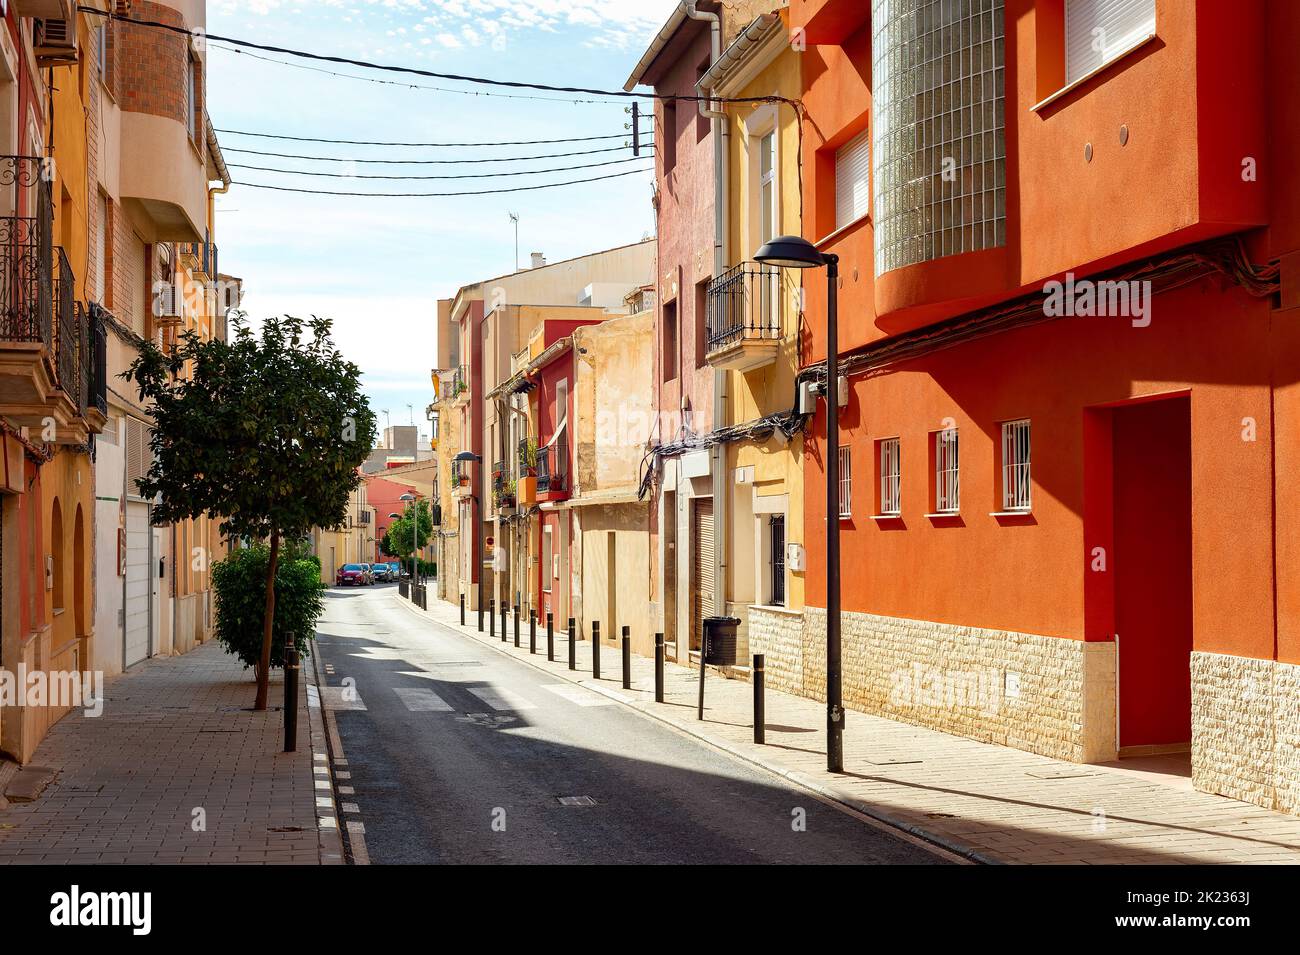 Street road with typical architecture of Mediterranean region in bright sunny day, Alicante, Spain Stock Photo